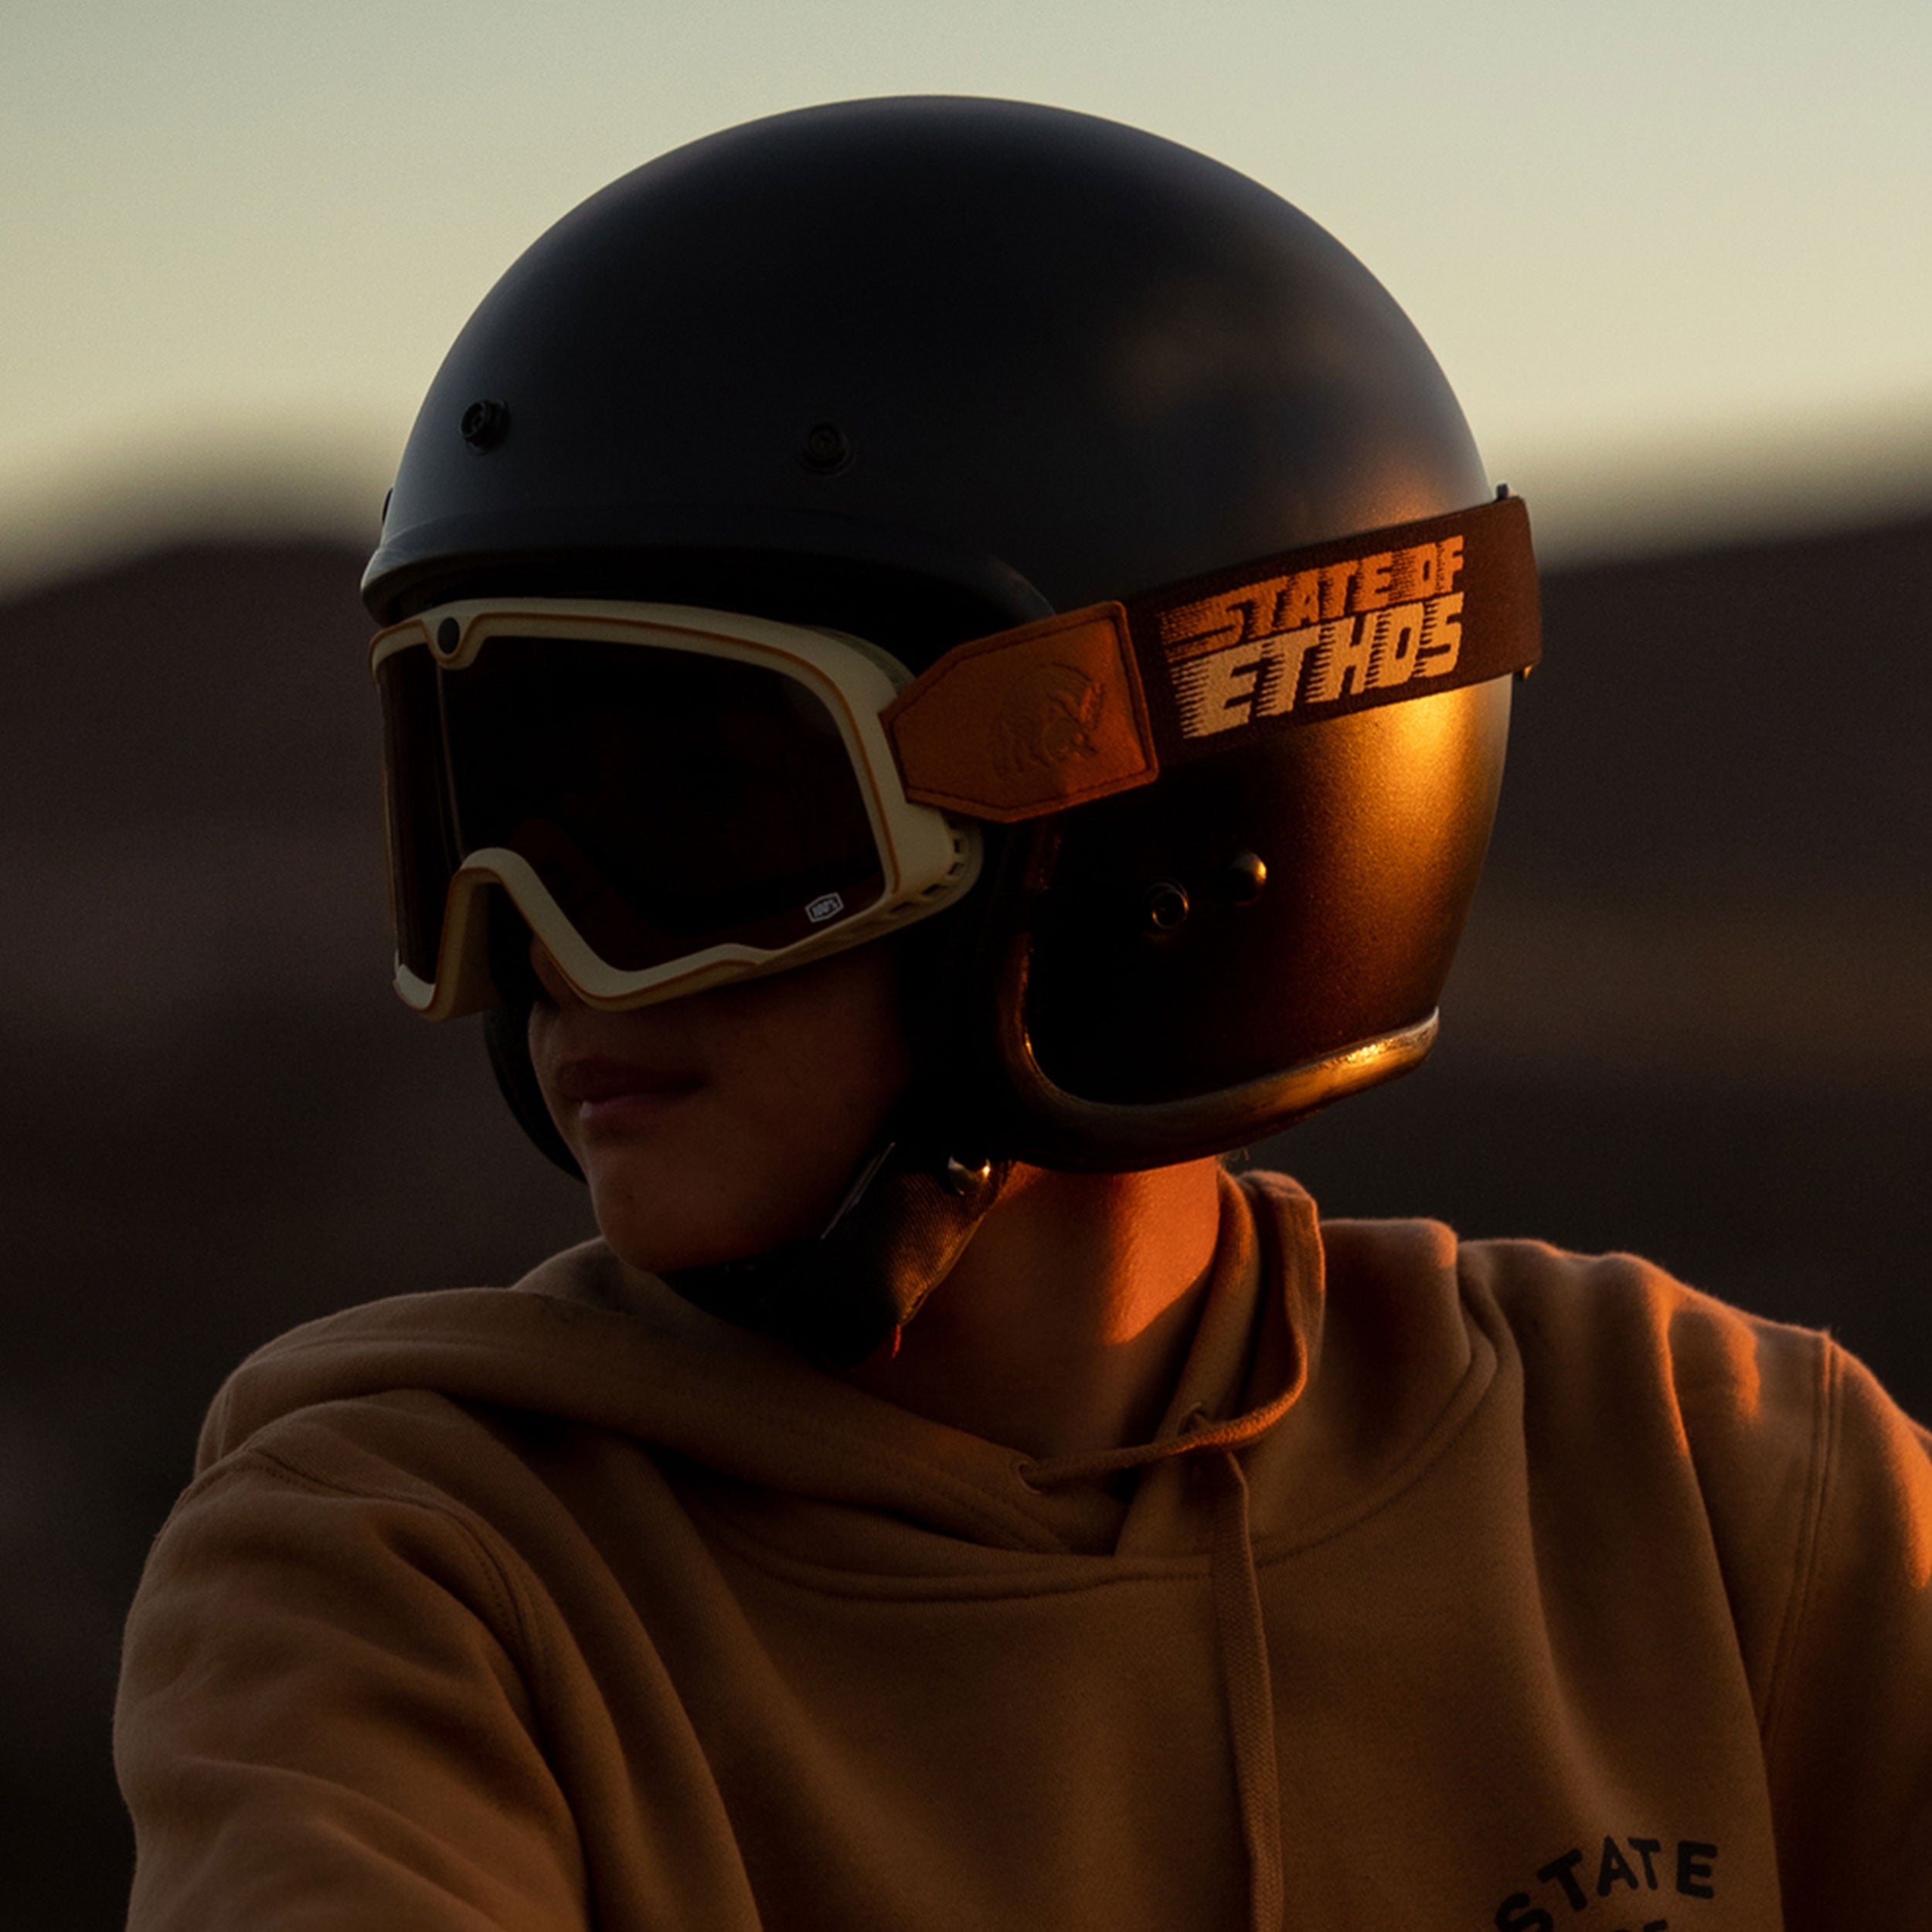 BARSTOW® Goggle State of Ethos - Secondary